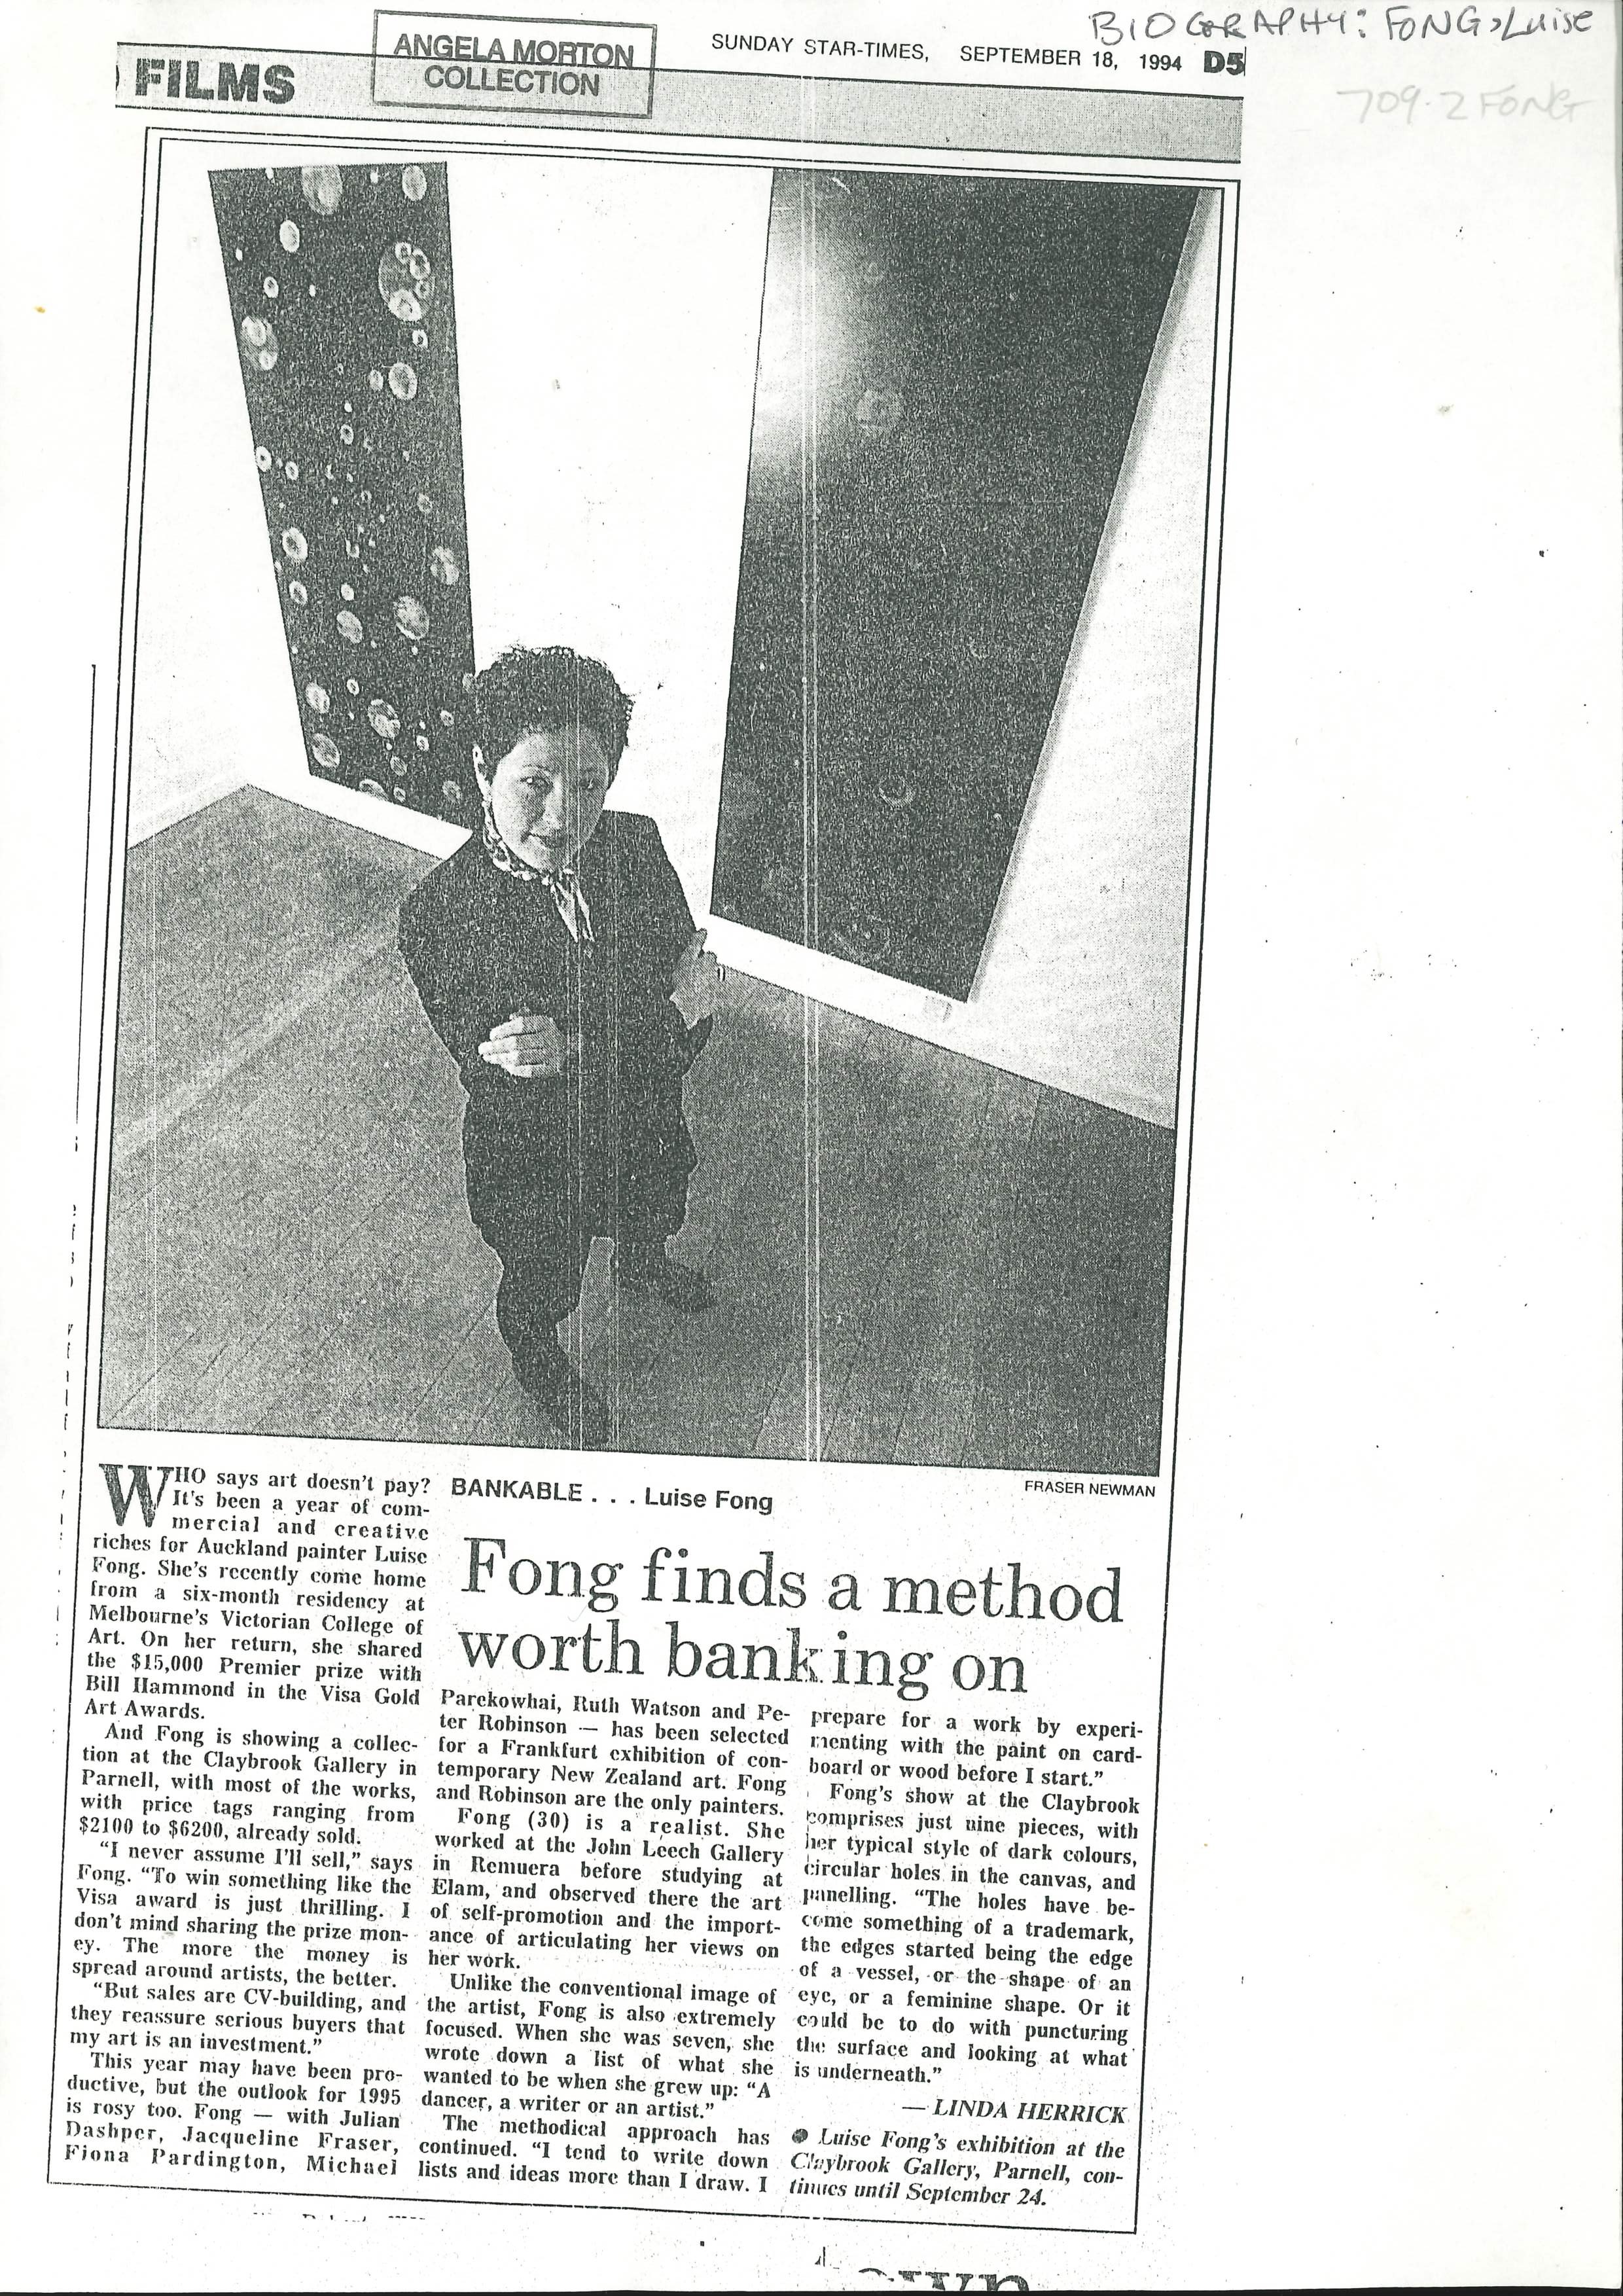 Newspaper article with photograph of Fong with her work. 